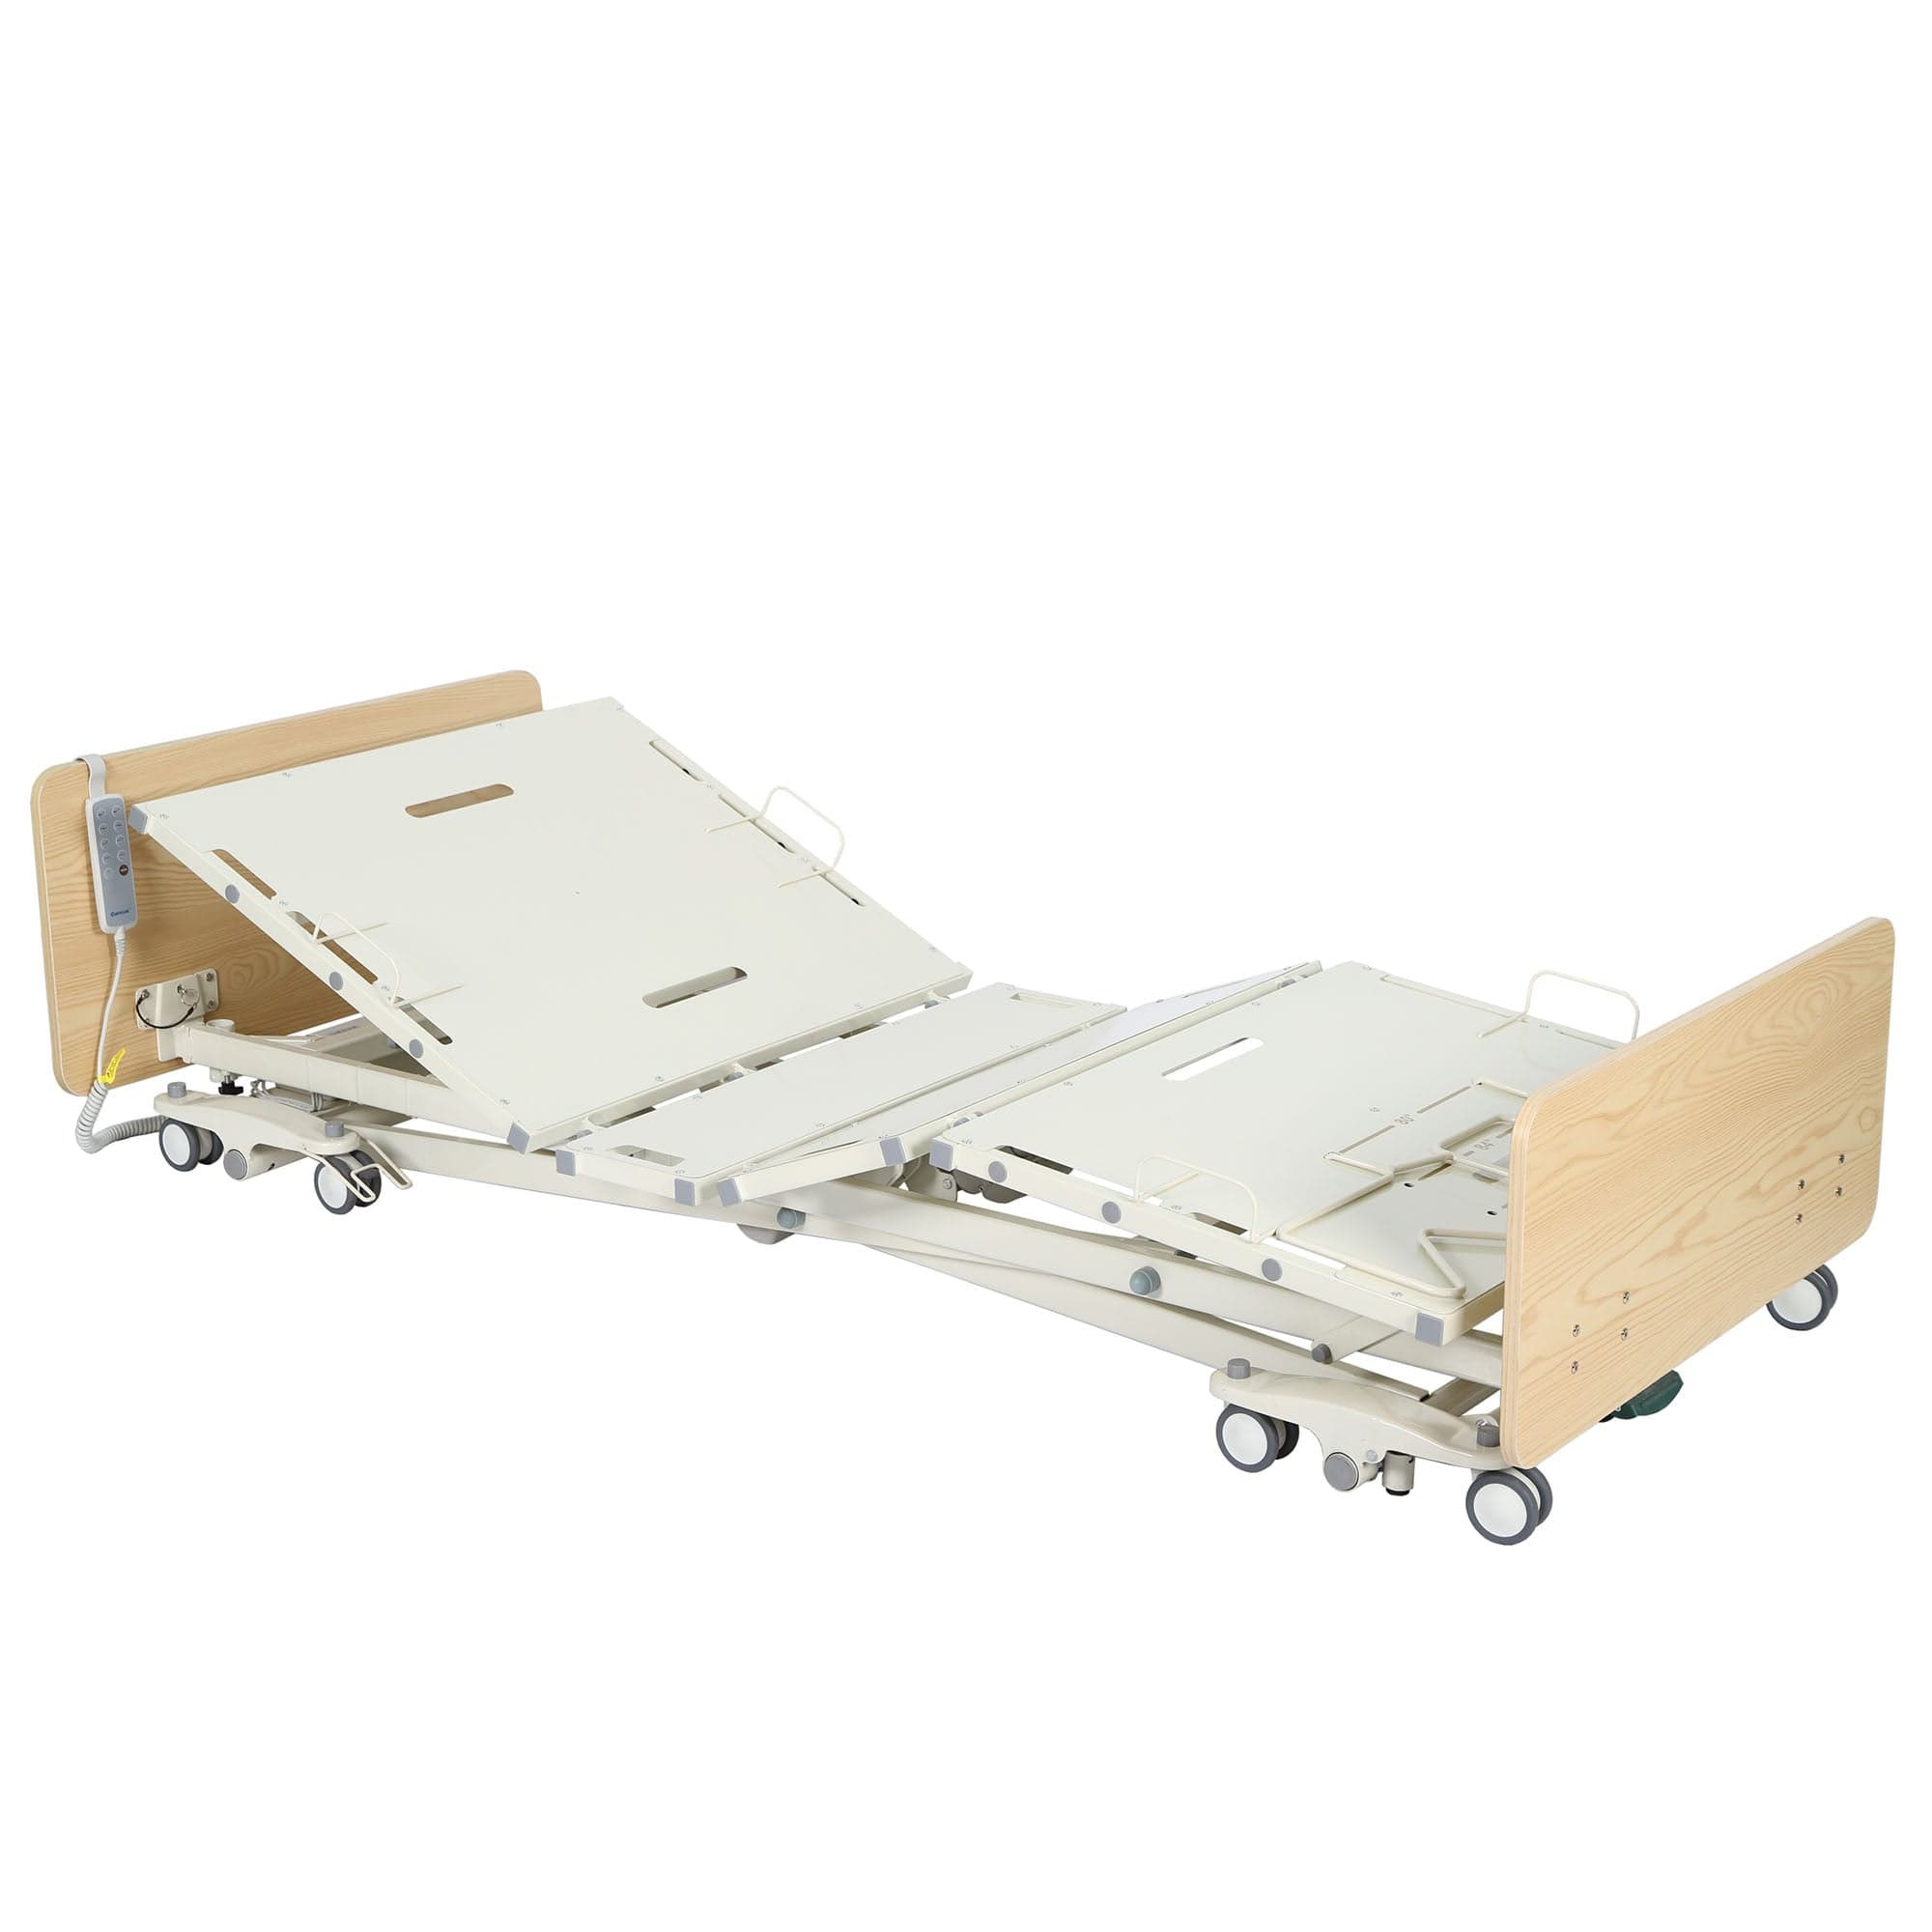 COSTCARE Costcare - Fast-Rising LTC Low Bed - B325